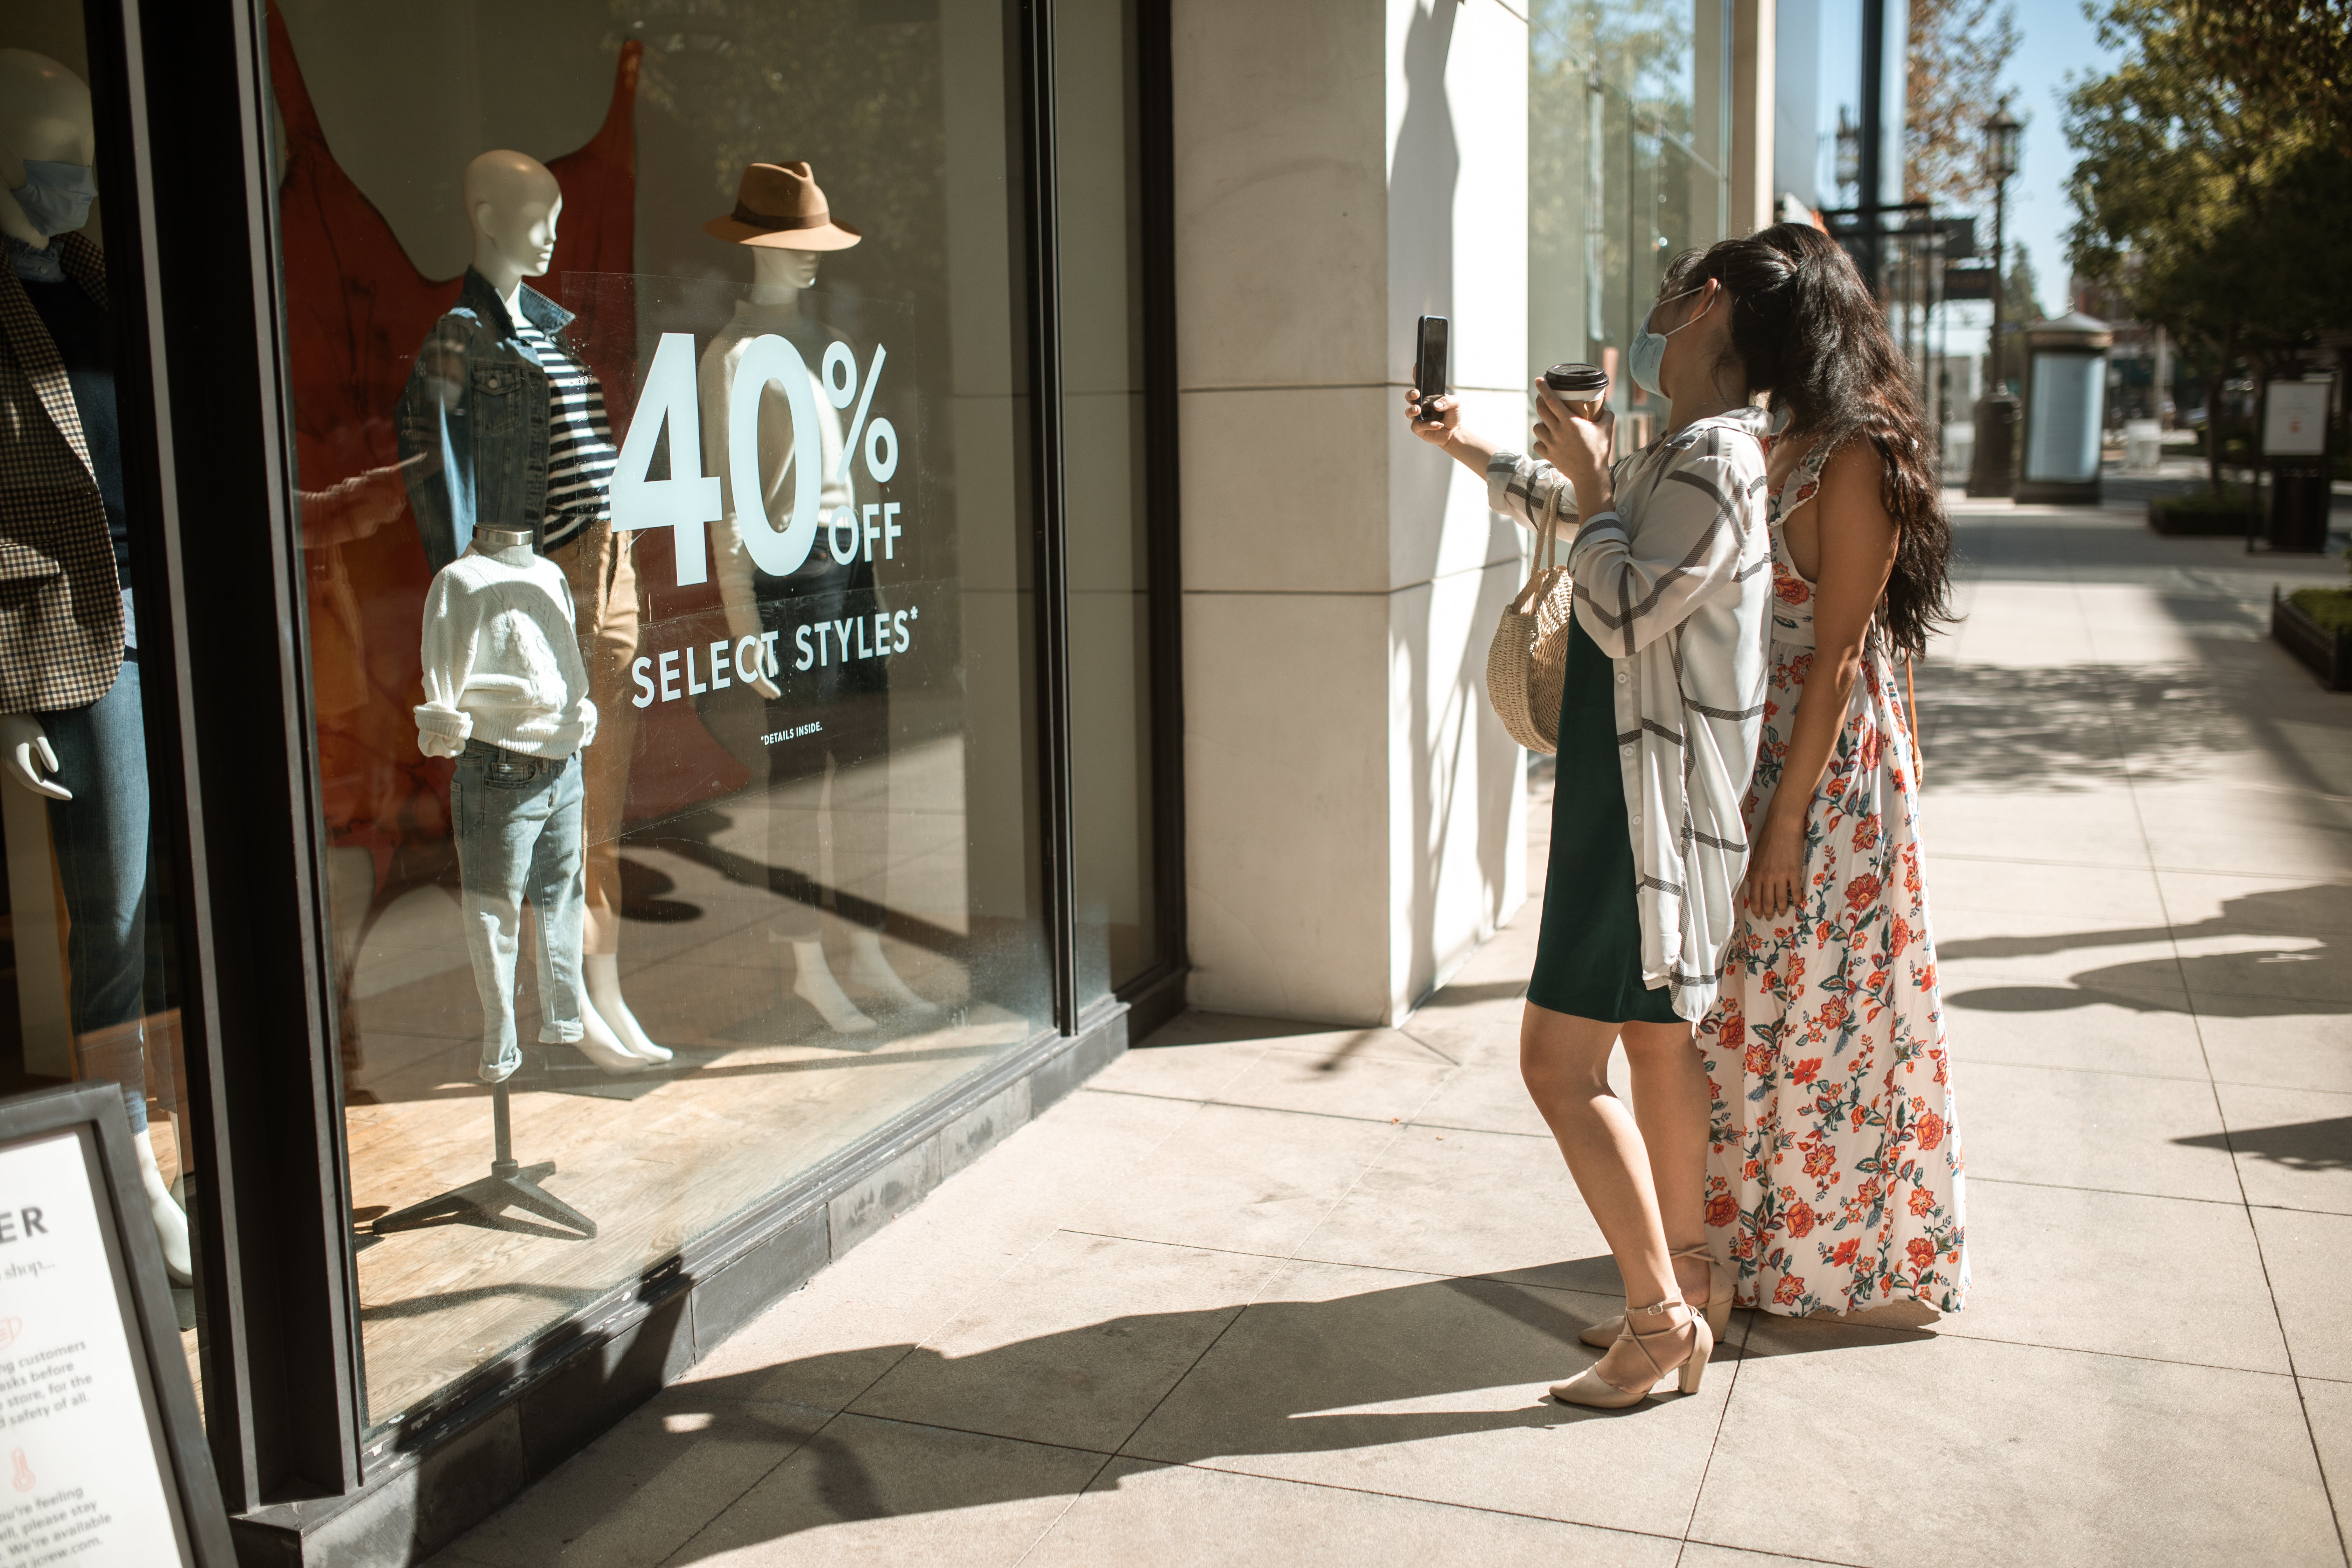 two shoppers in sundresses admire clothing in a window display